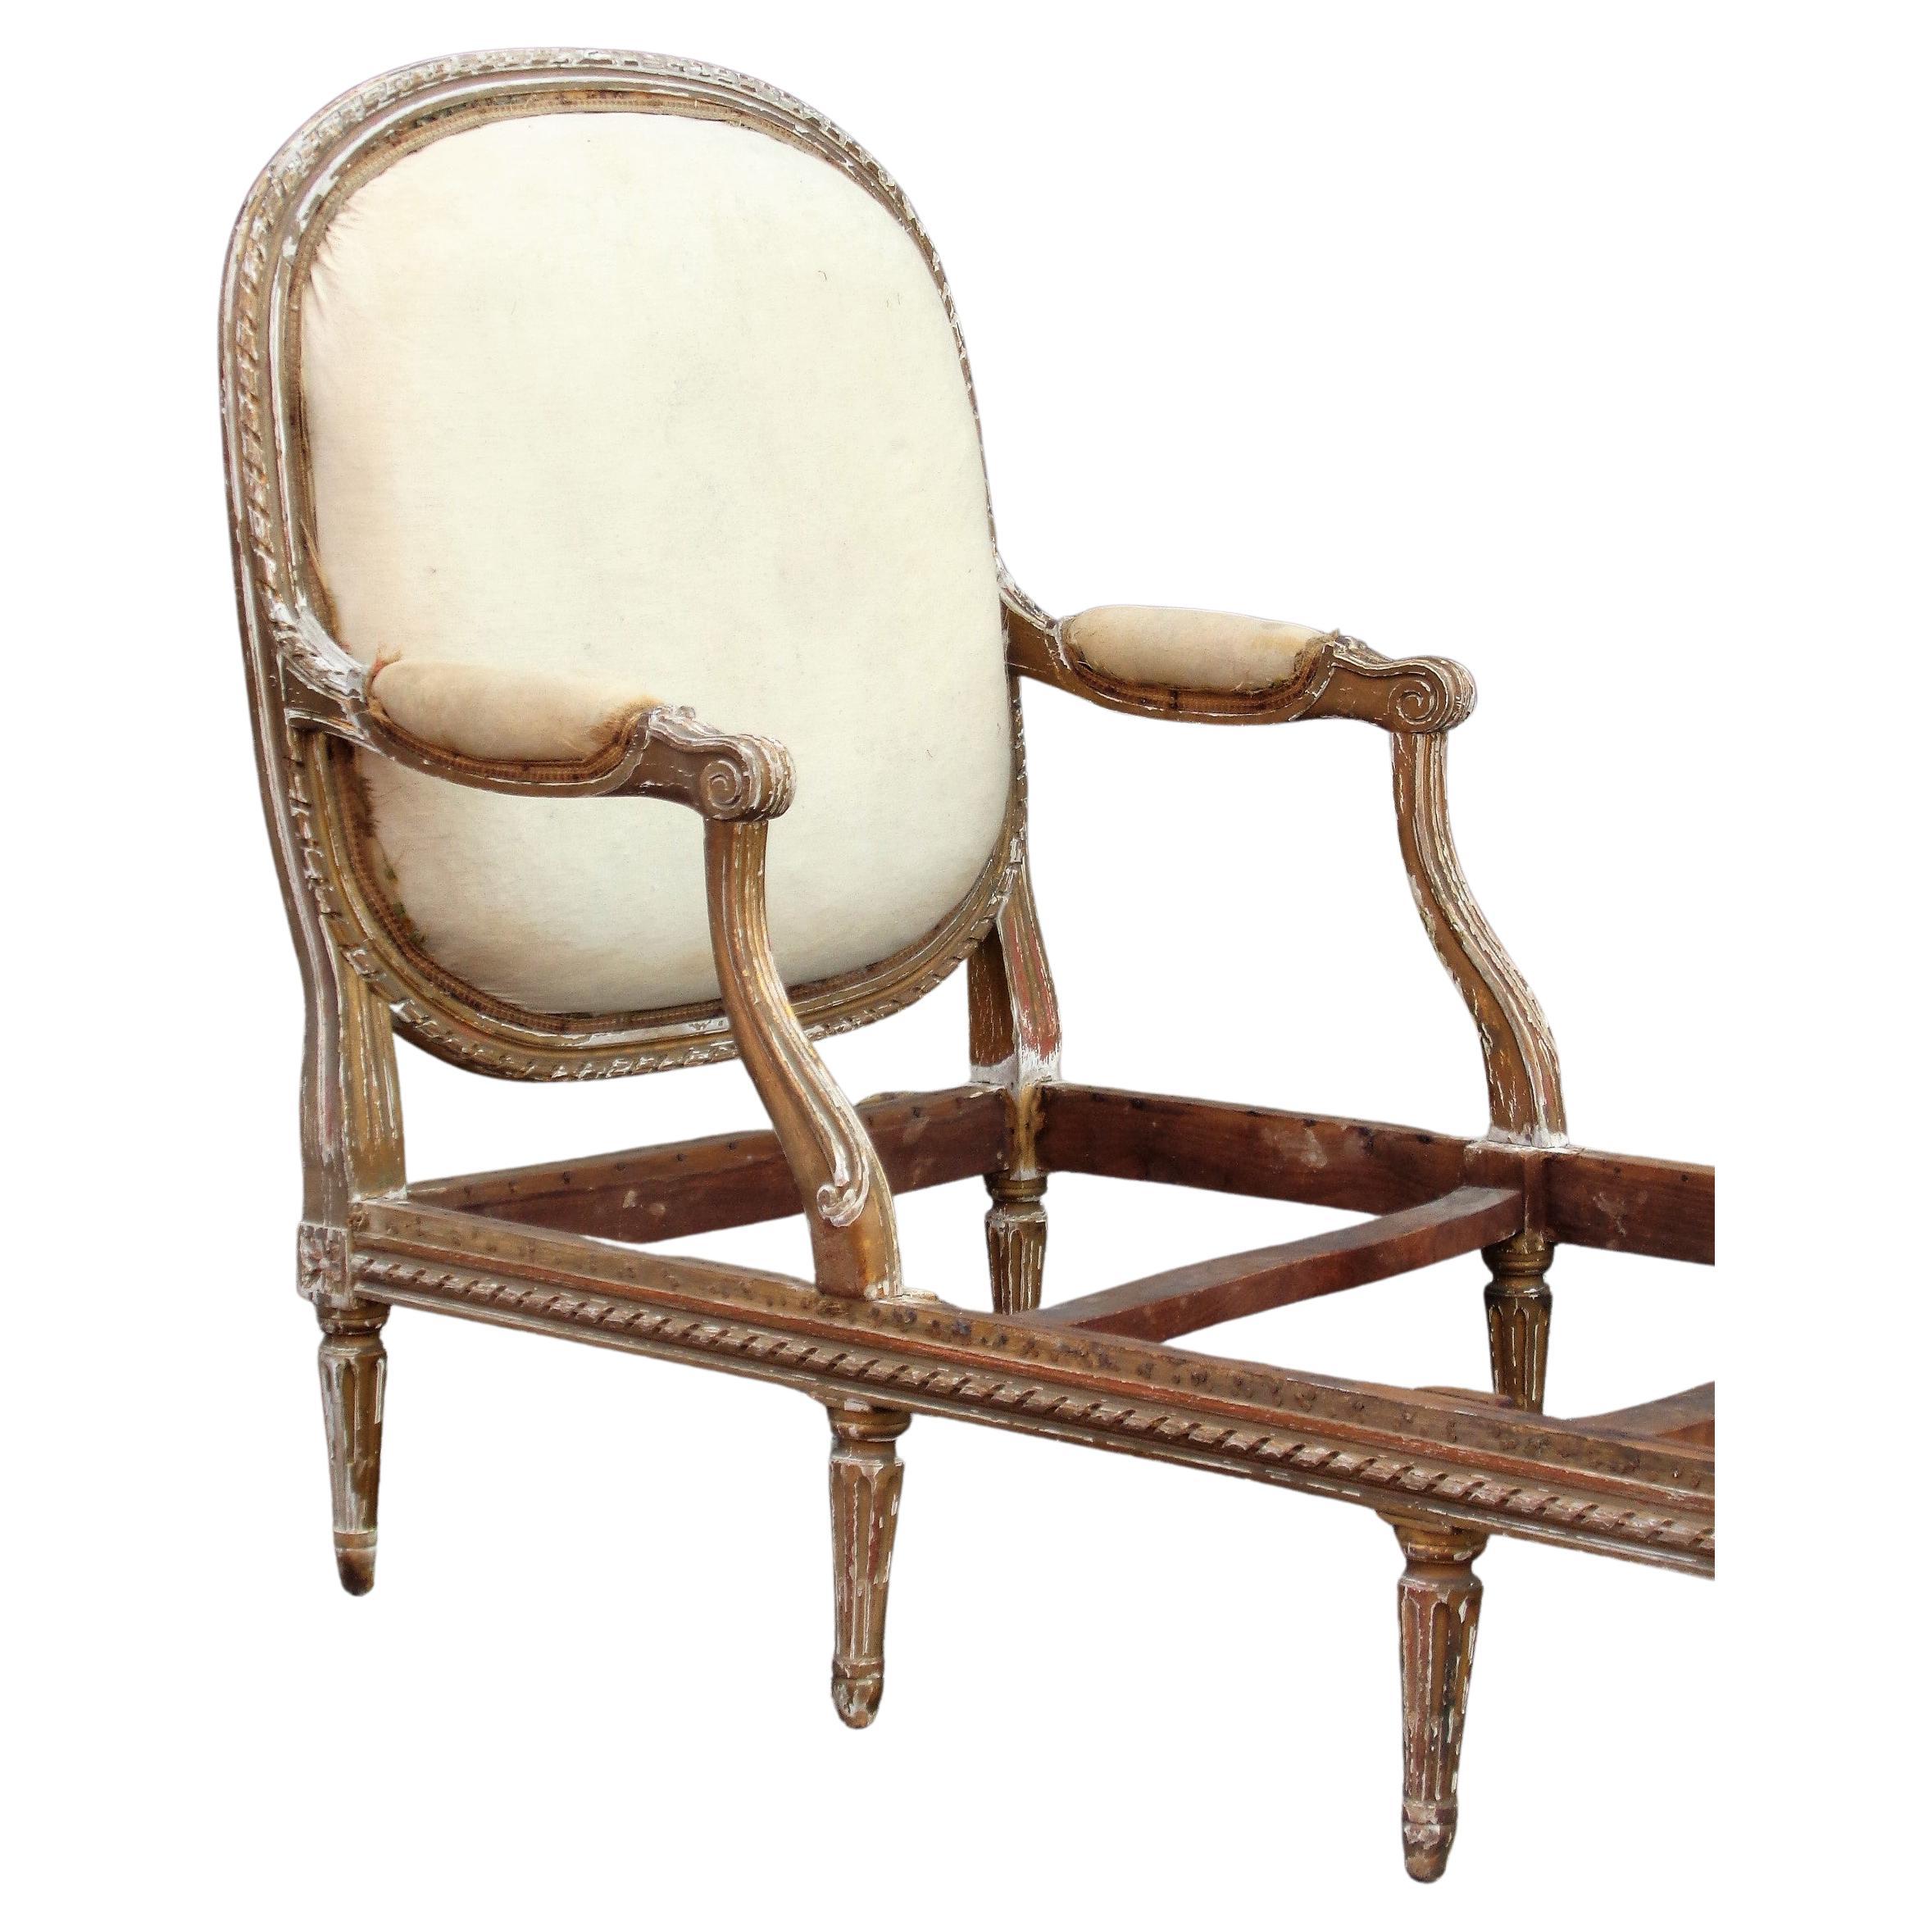 French 19th Century Louis XVI Style Chaise Lounge